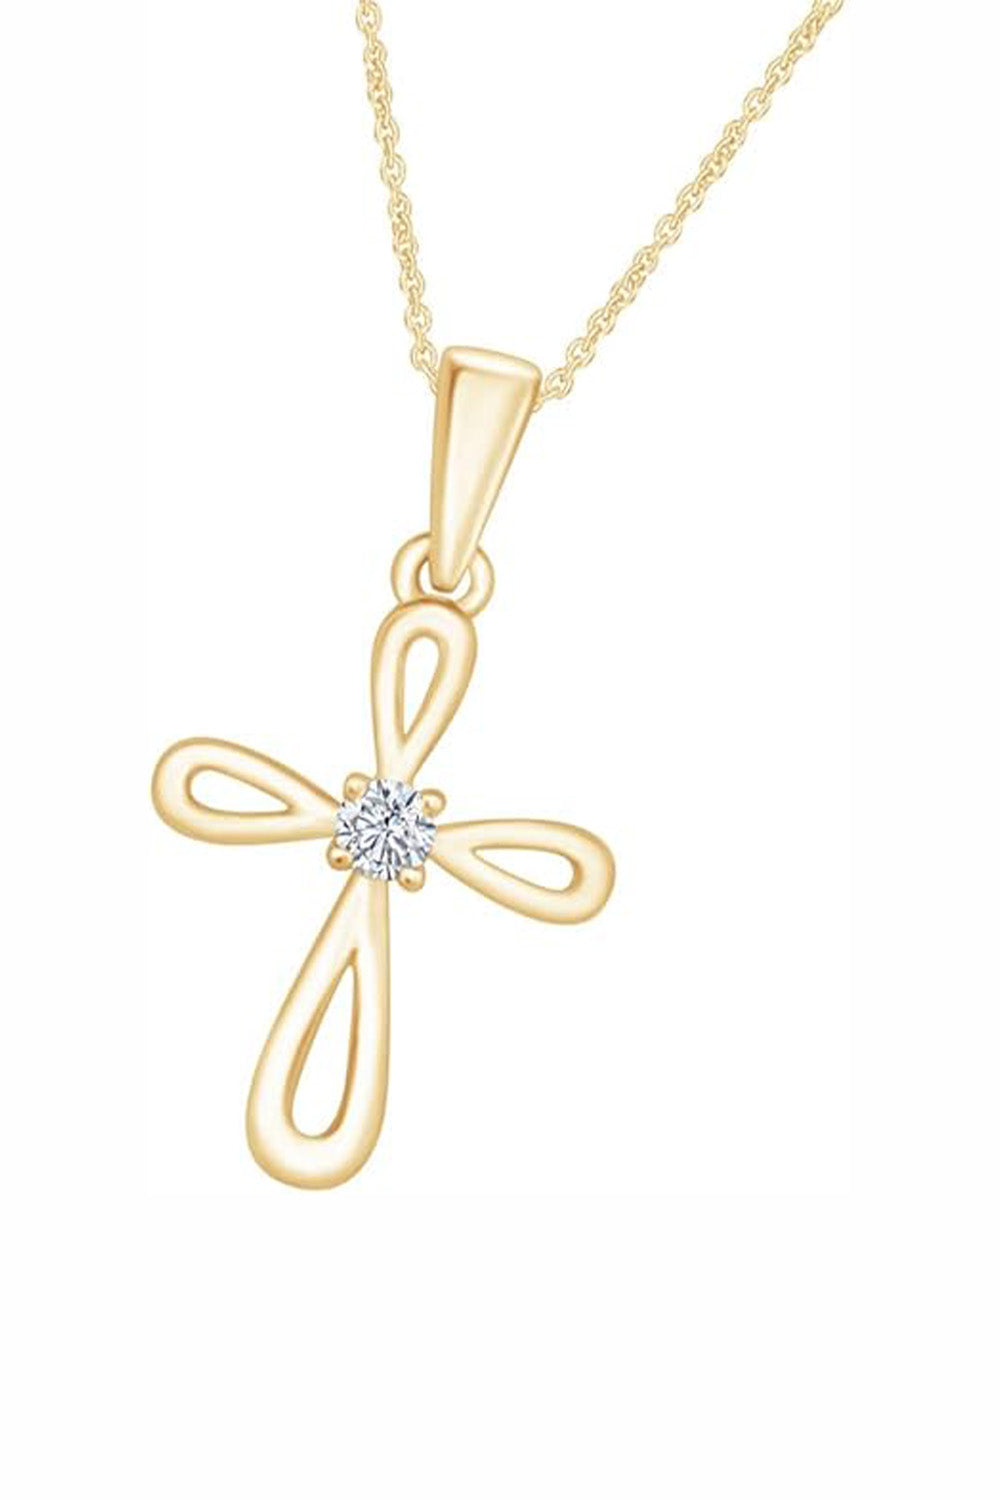 Yellow Gold Color Stylish Open Cross Pendant Necklace for Women 